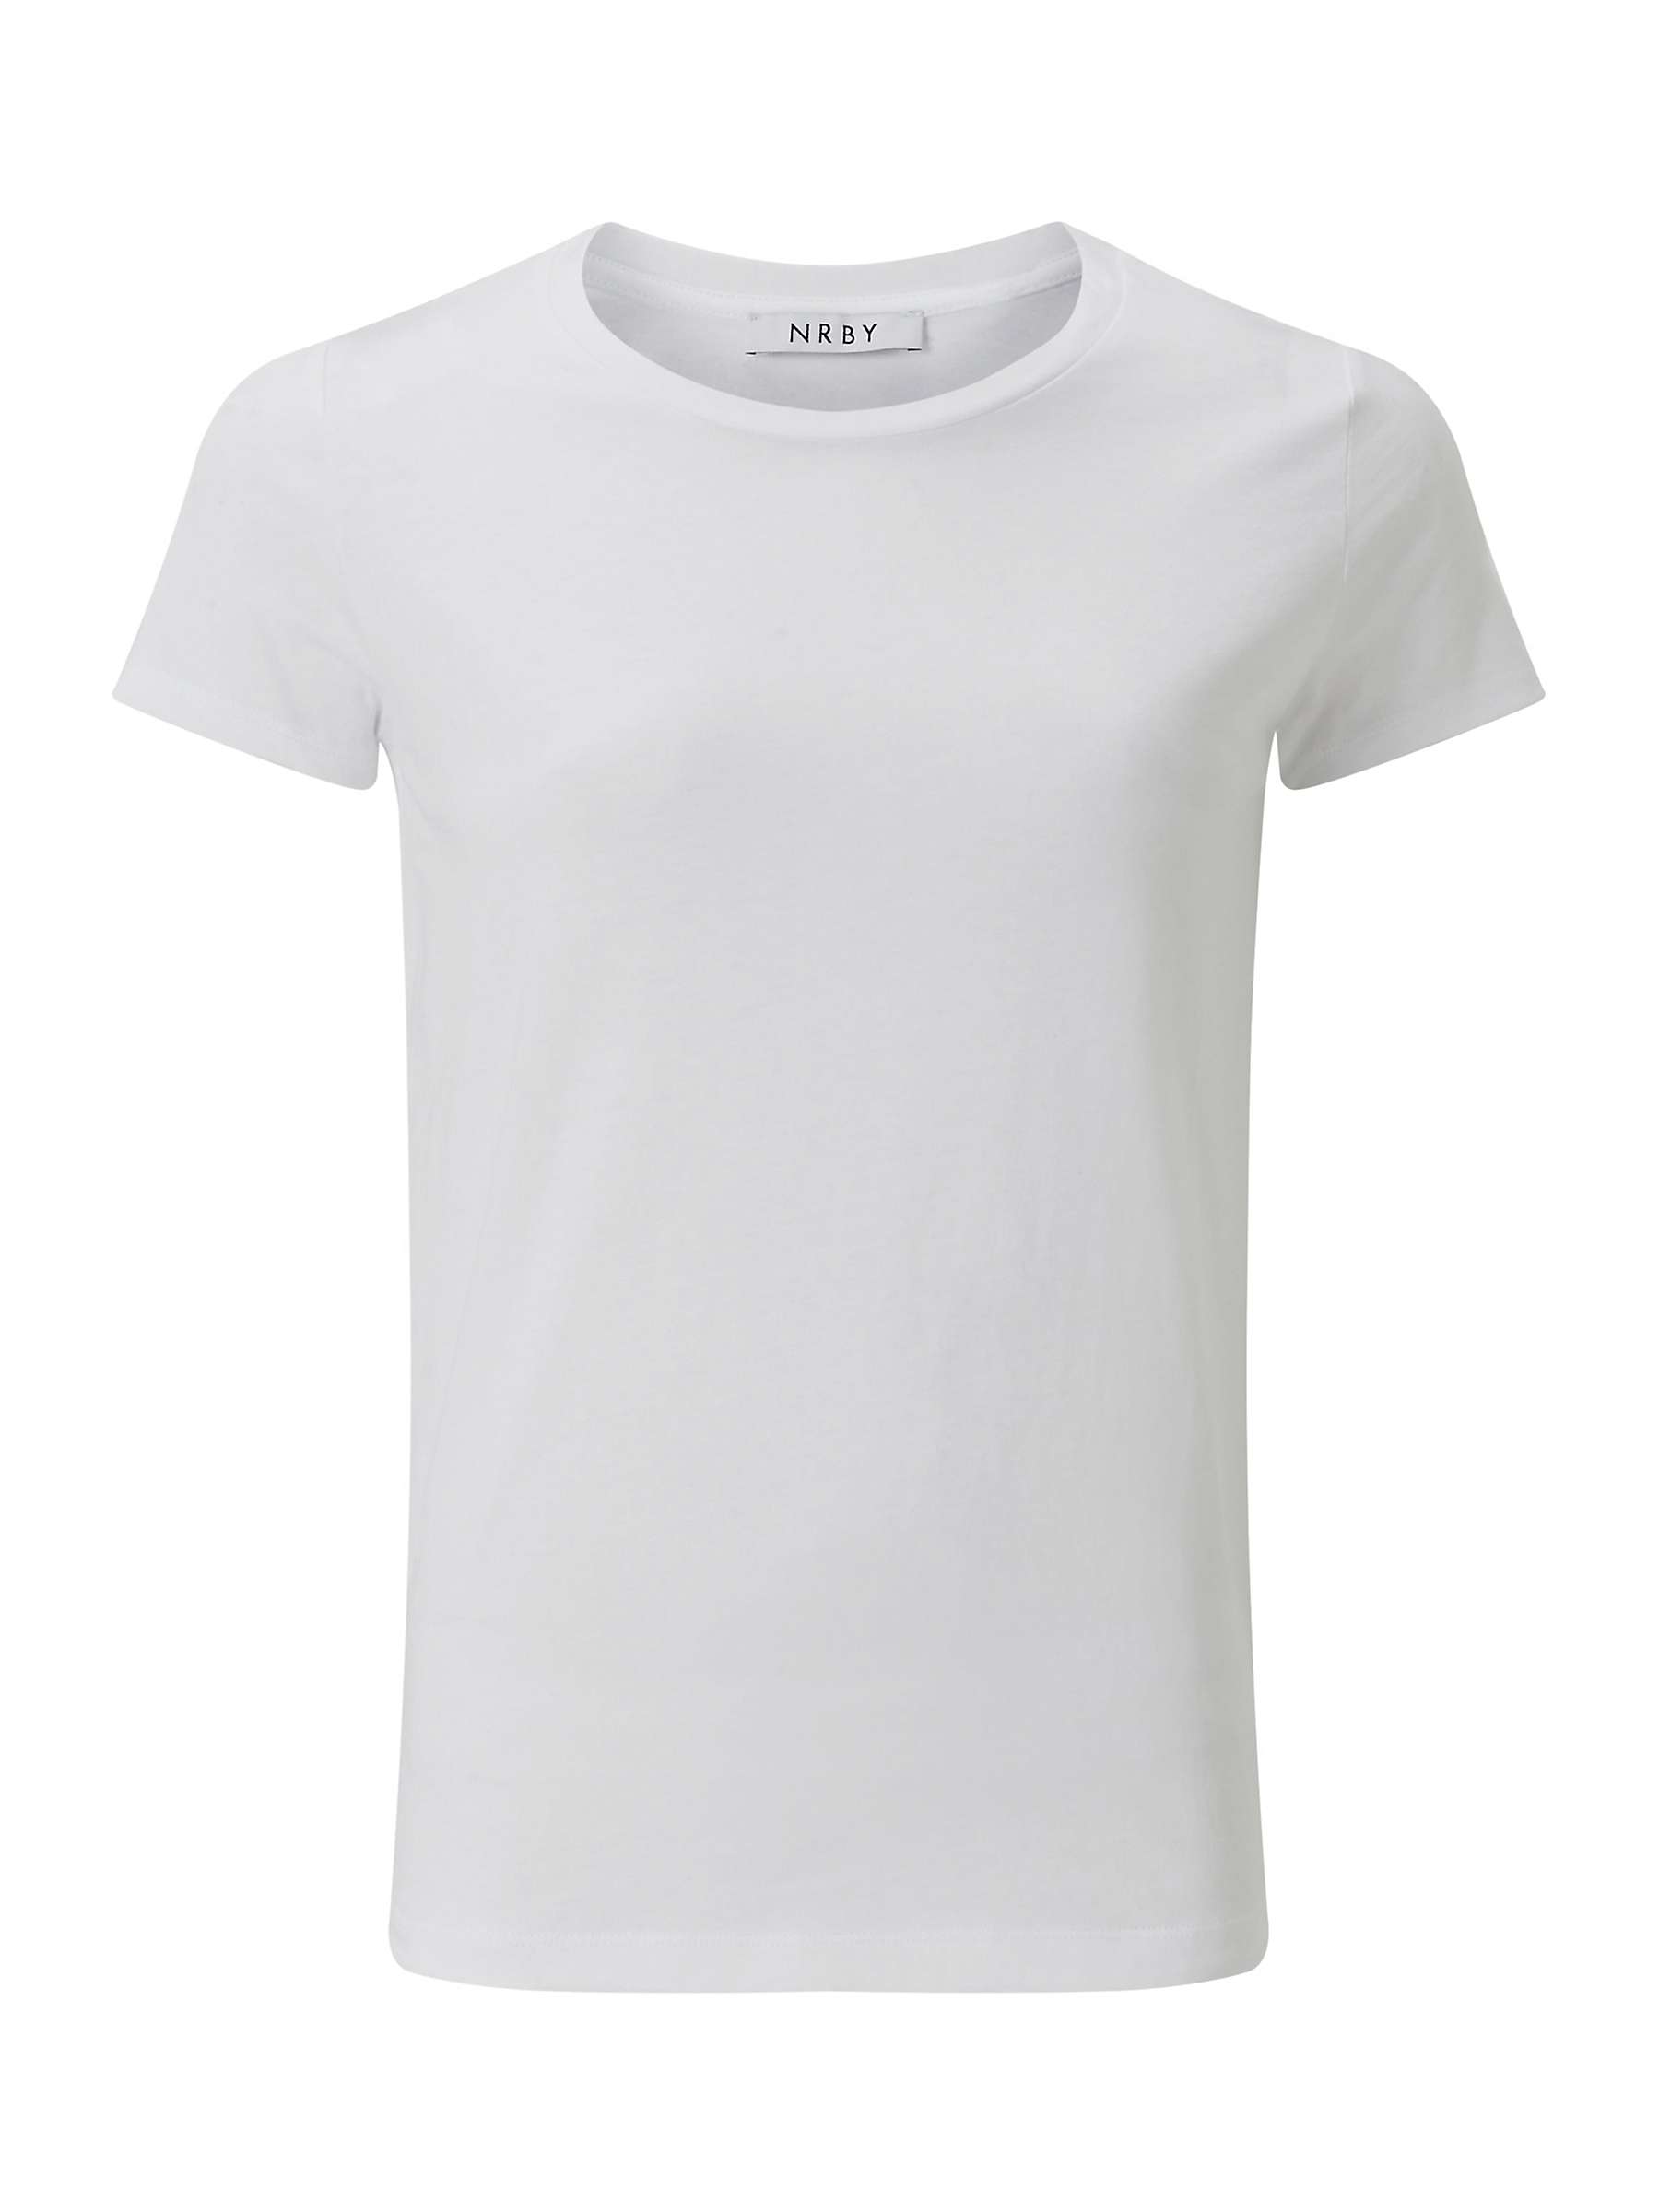 Buy NRBY Jamie Cotton Crew Neck T- Shirt, White Online at johnlewis.com